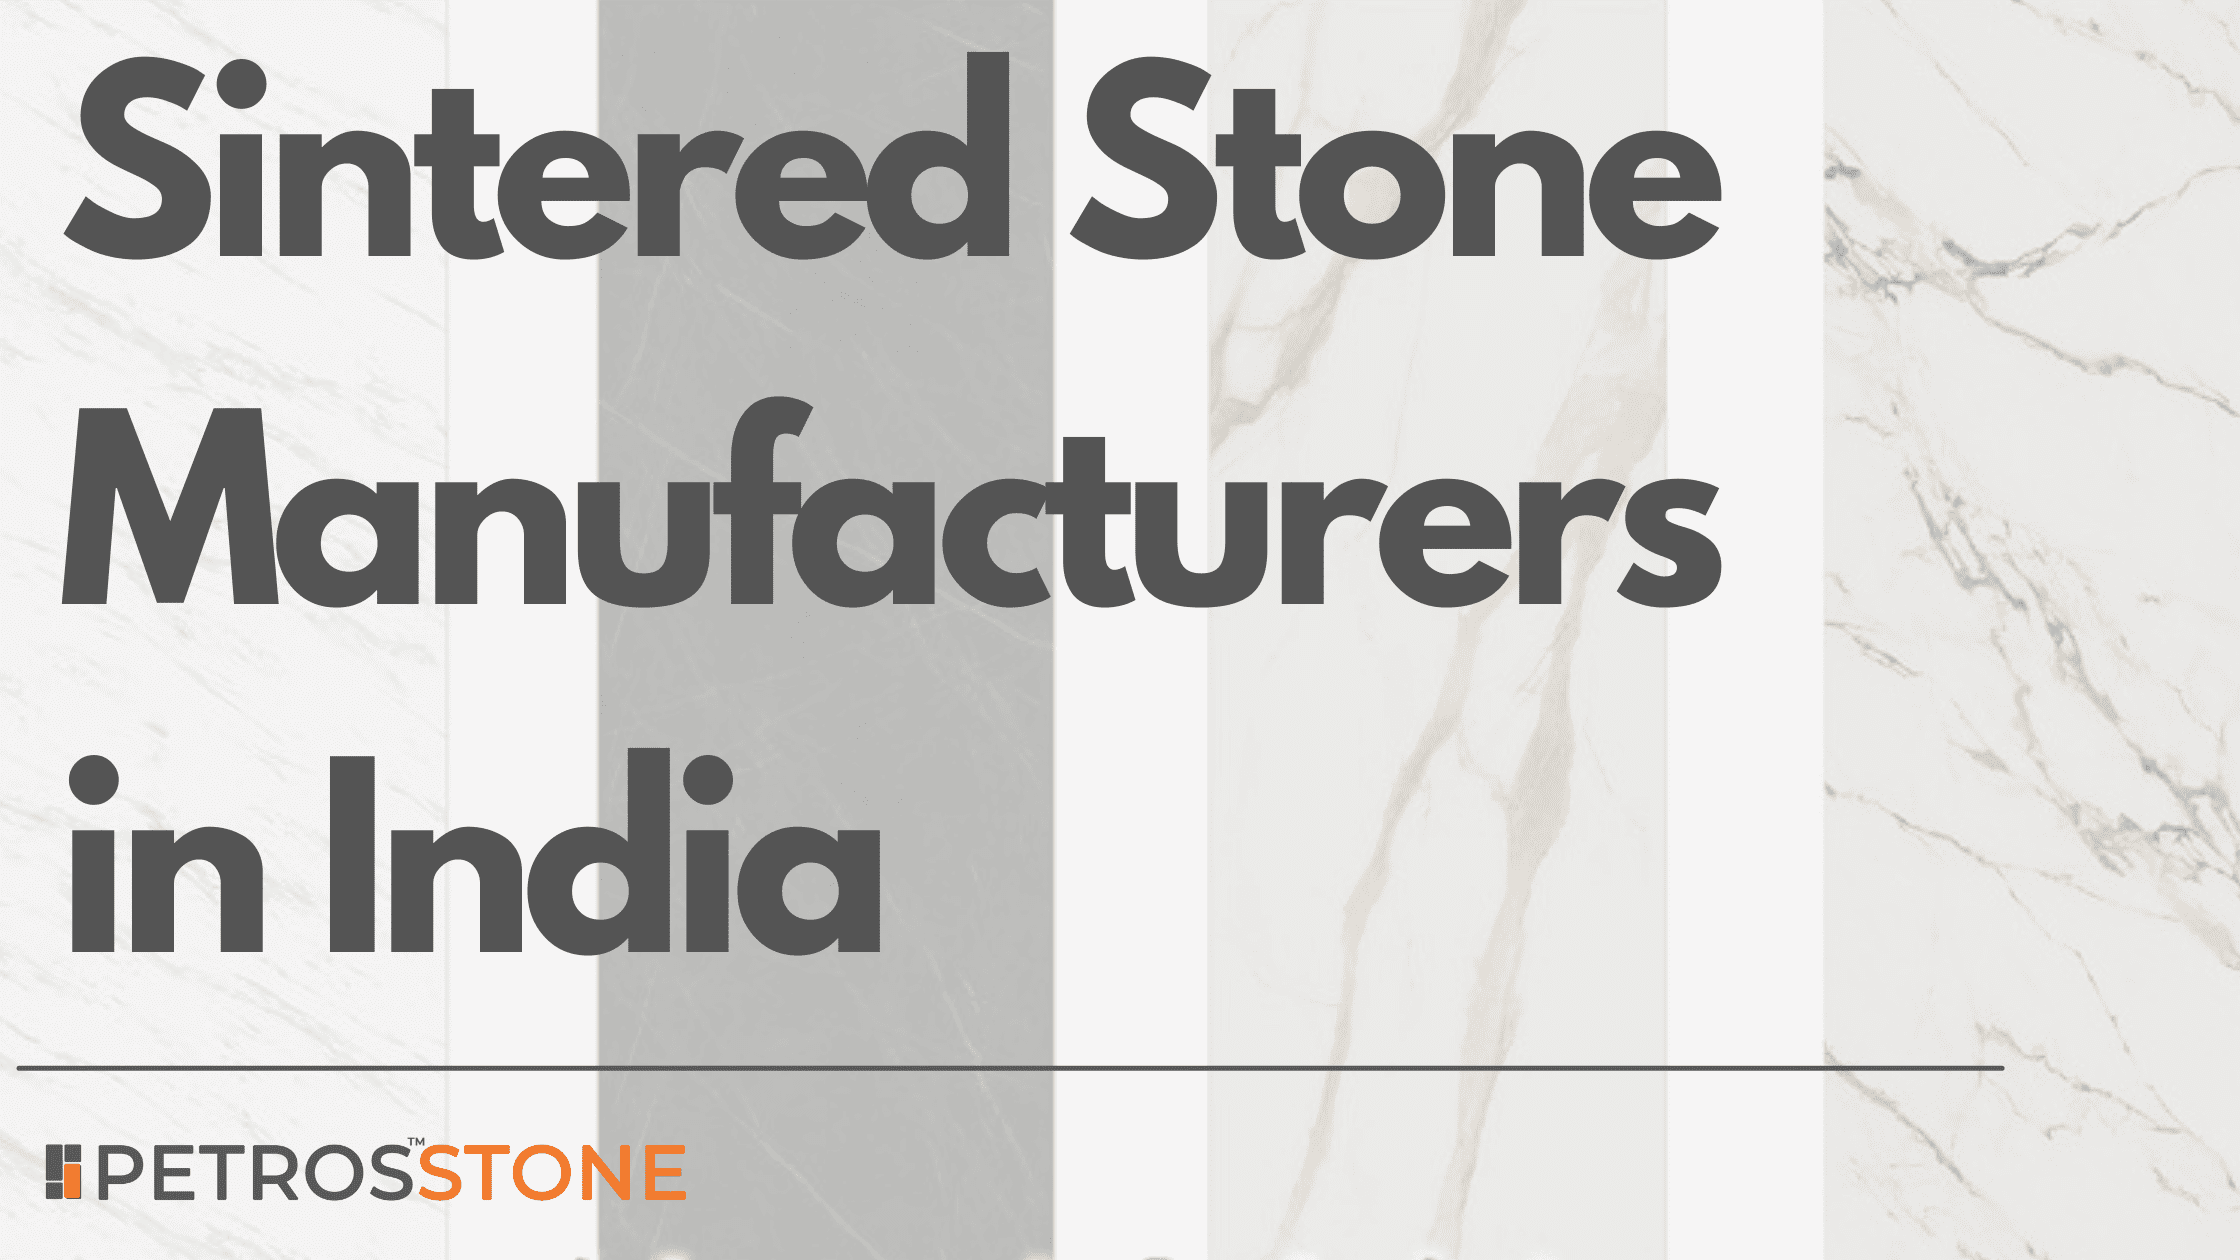 Sintered Stone Manufacturers in India